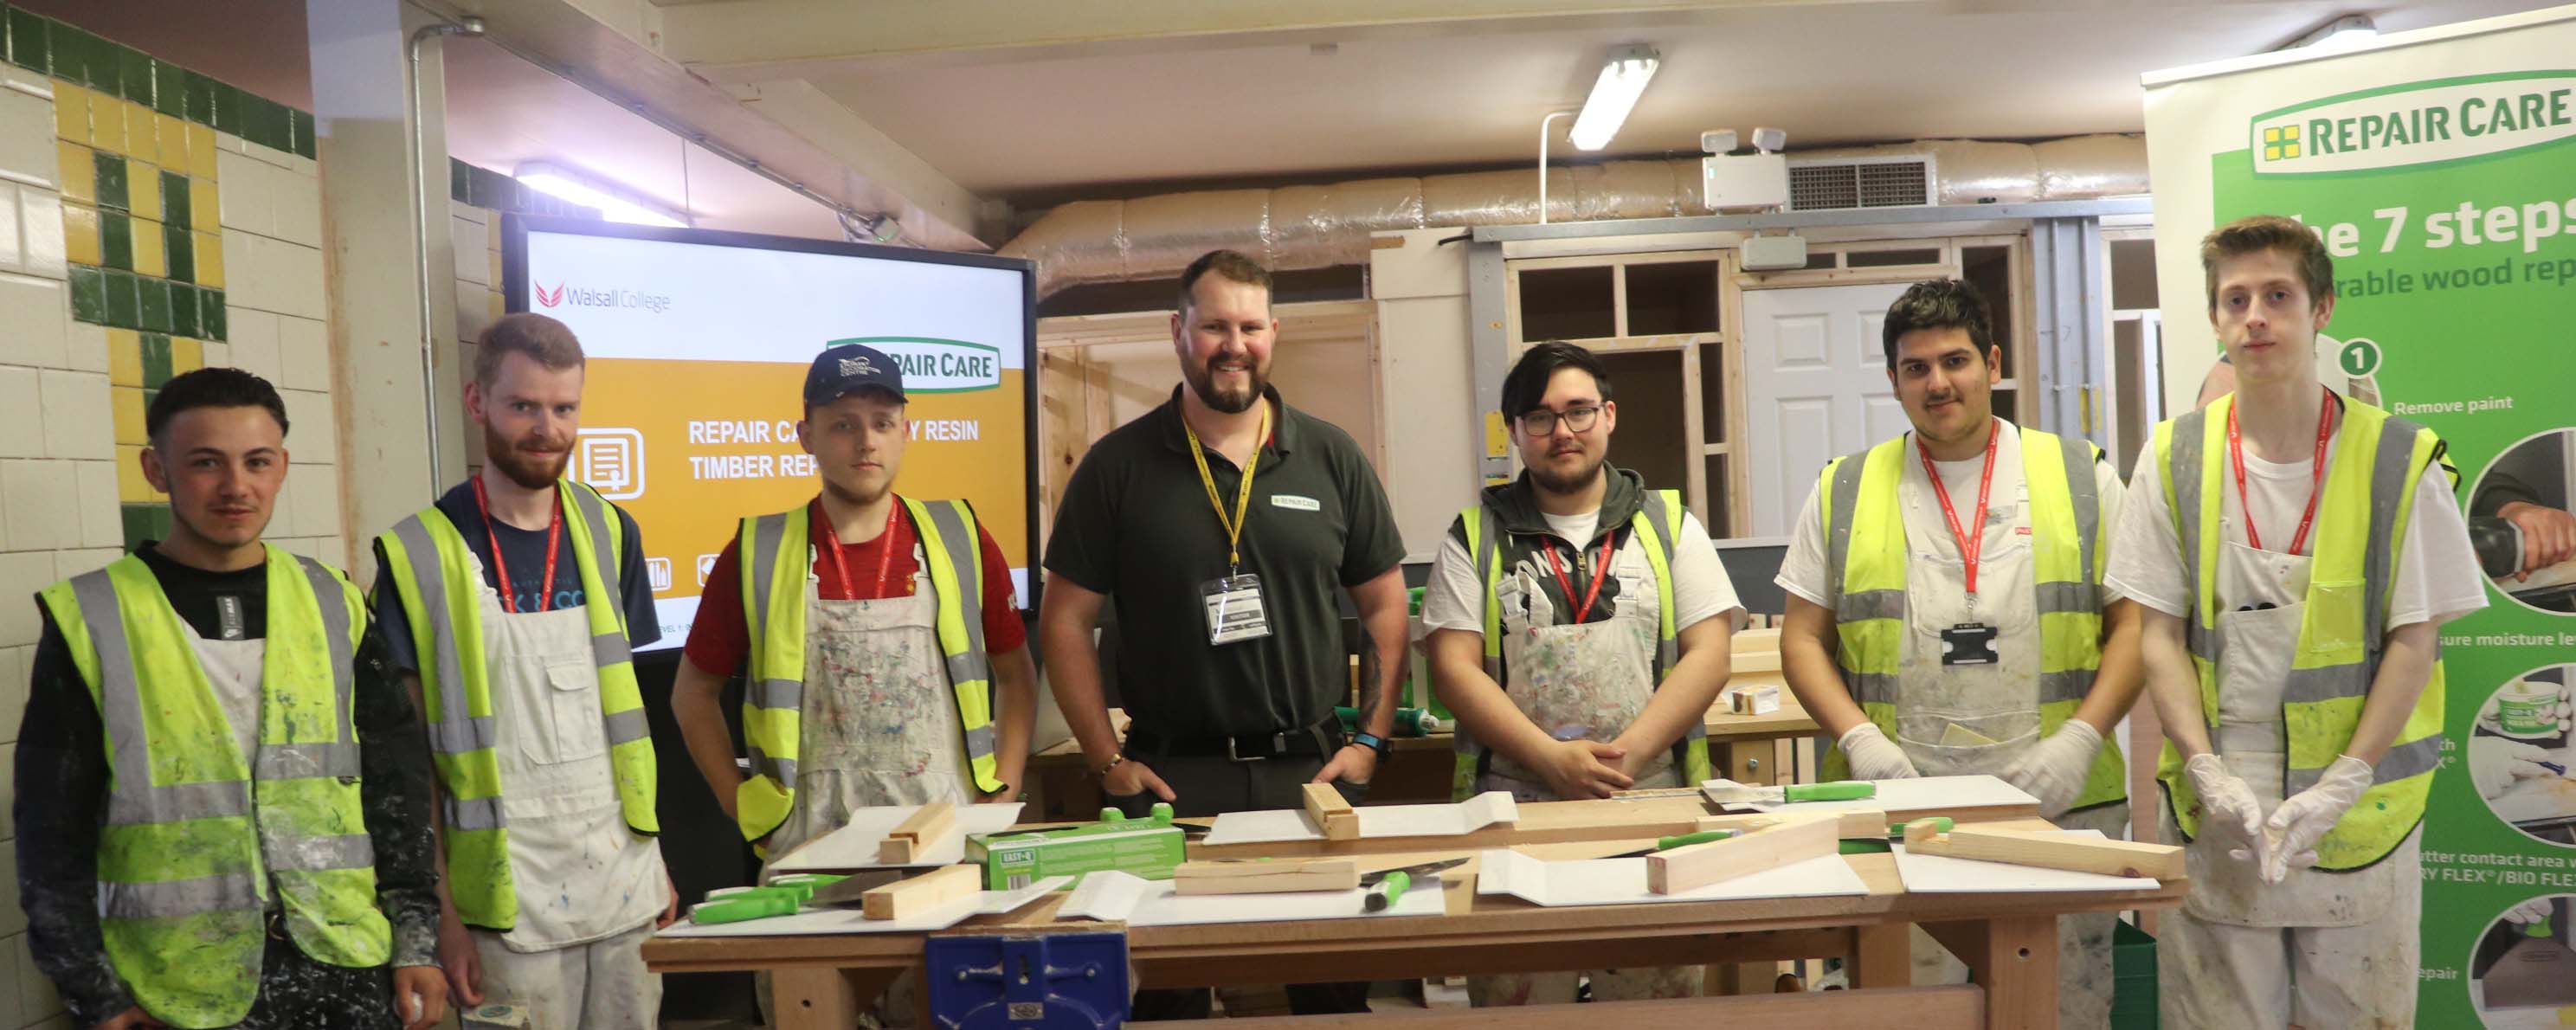 Painting and decorating students with James Lester, Repair Care International